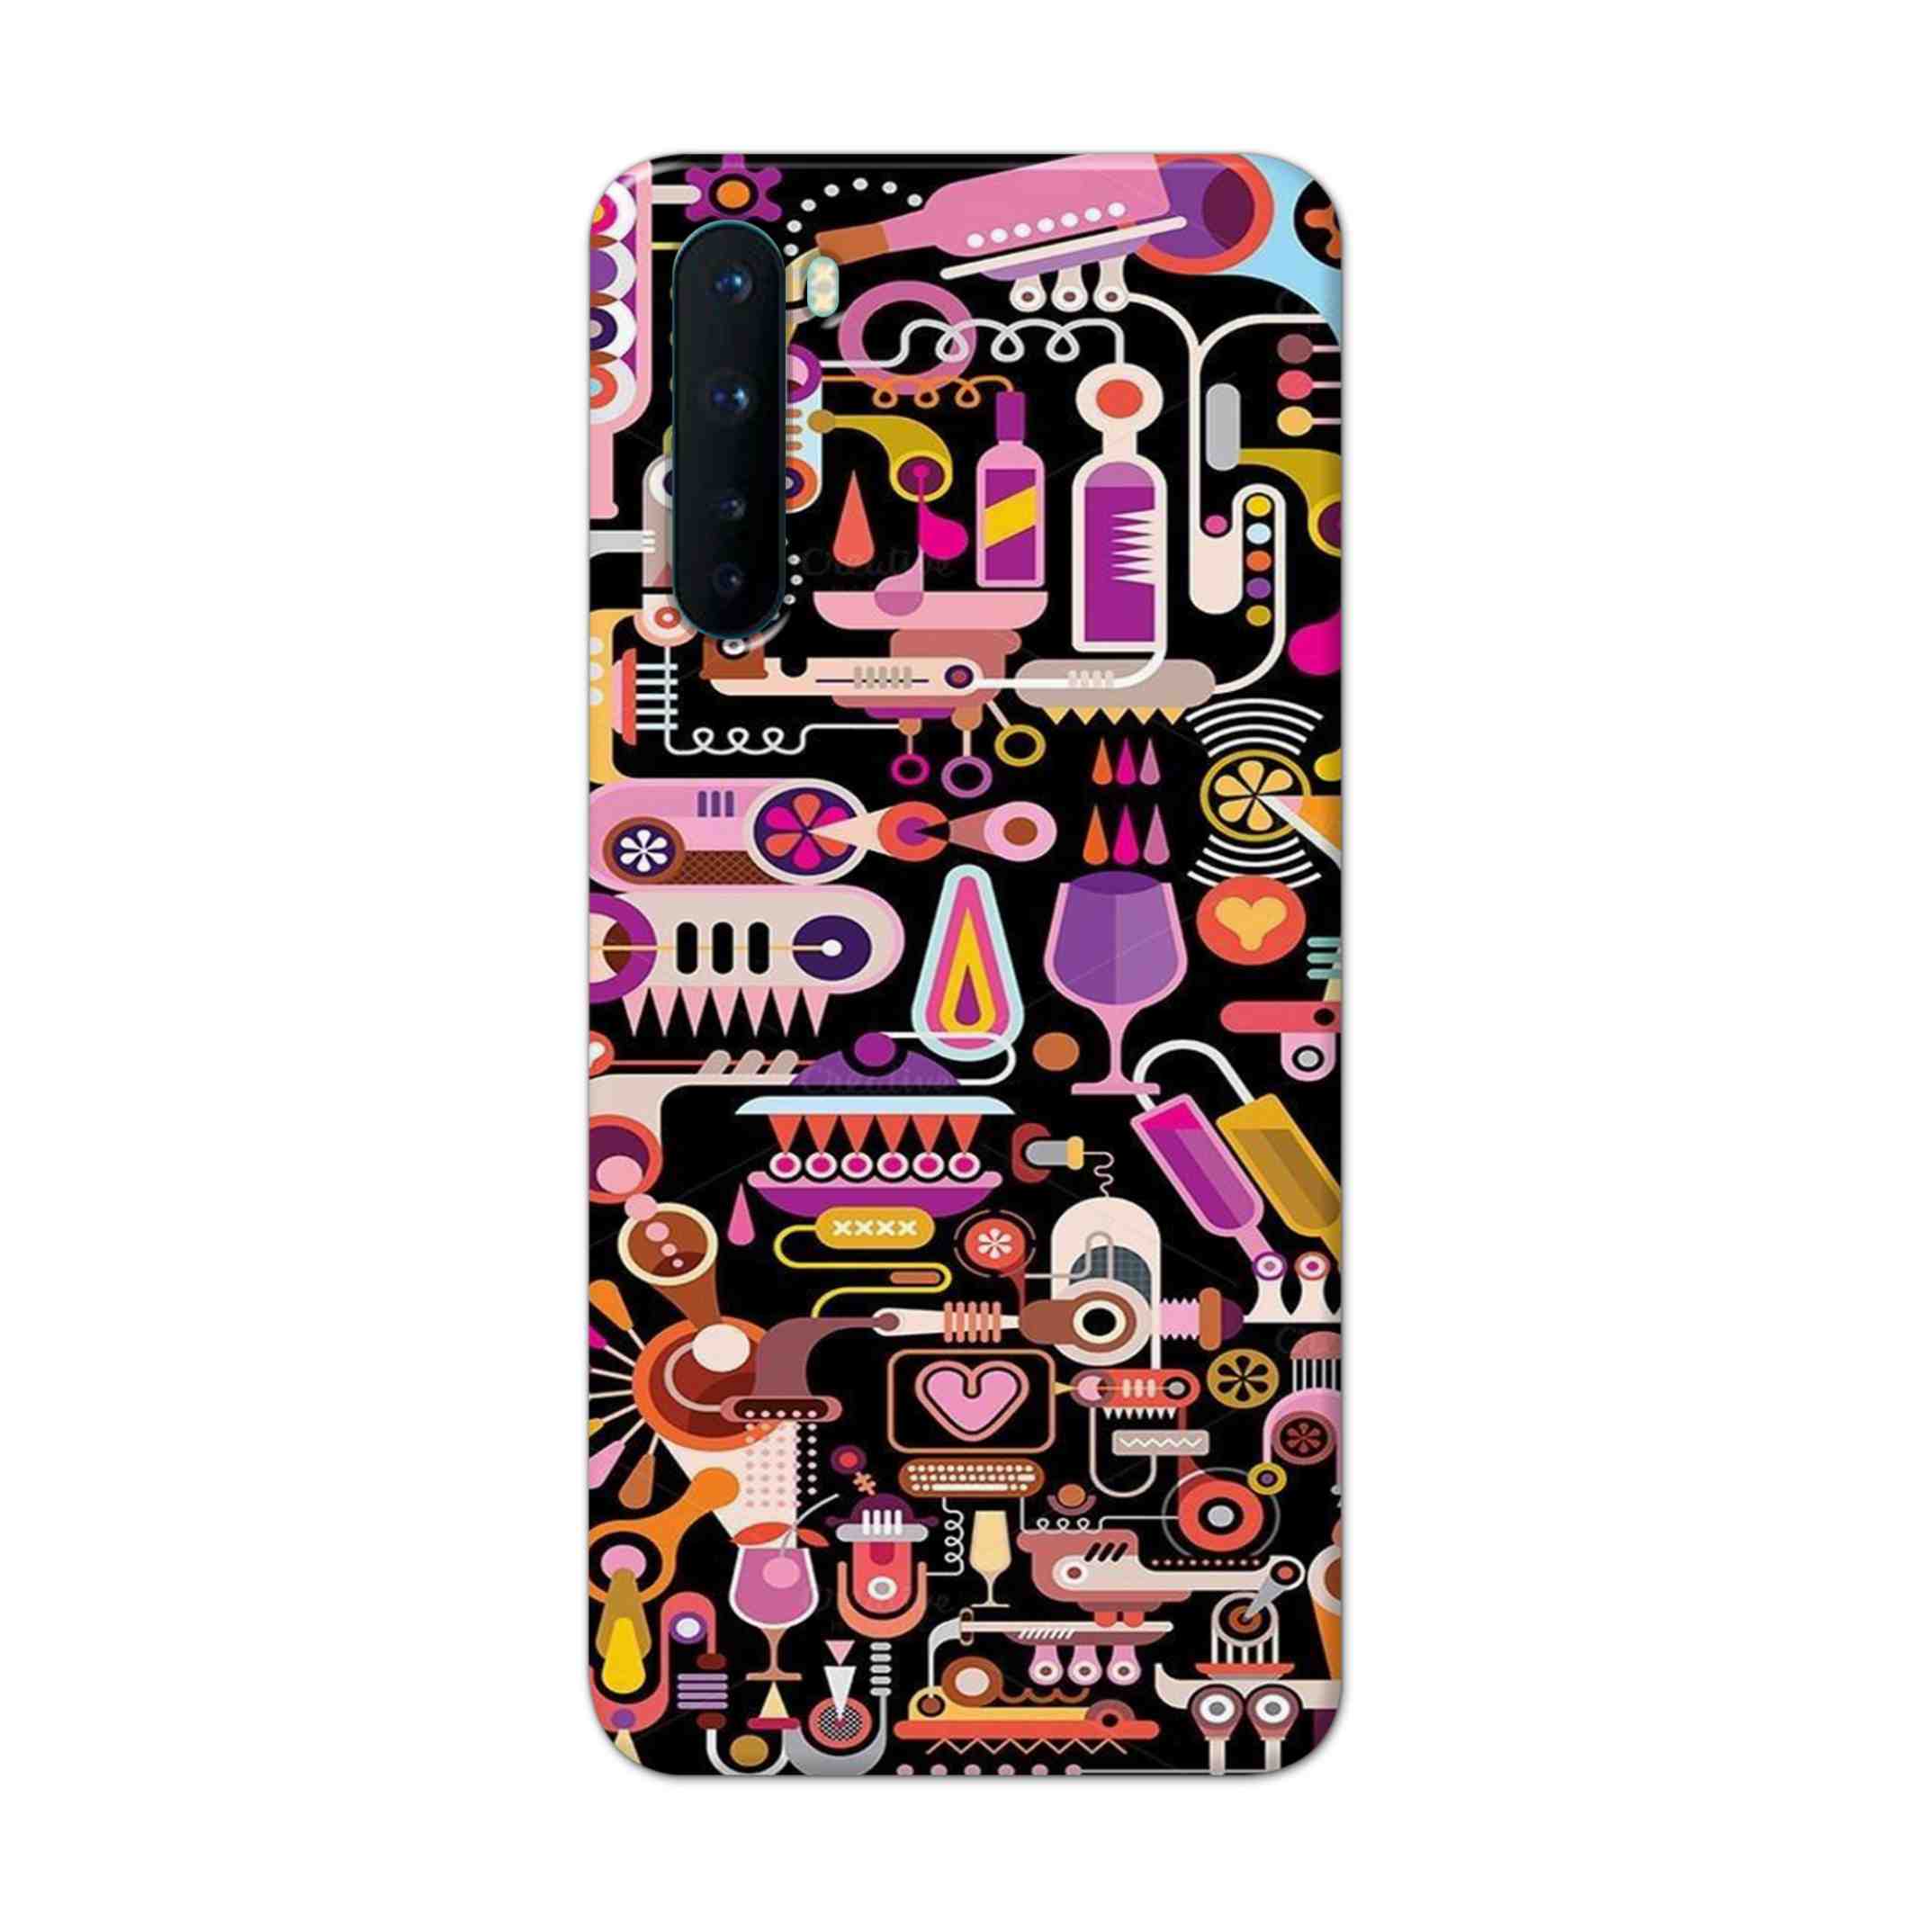 Buy Lab Art Hard Back Mobile Phone Case Cover For OnePlus Nord Online